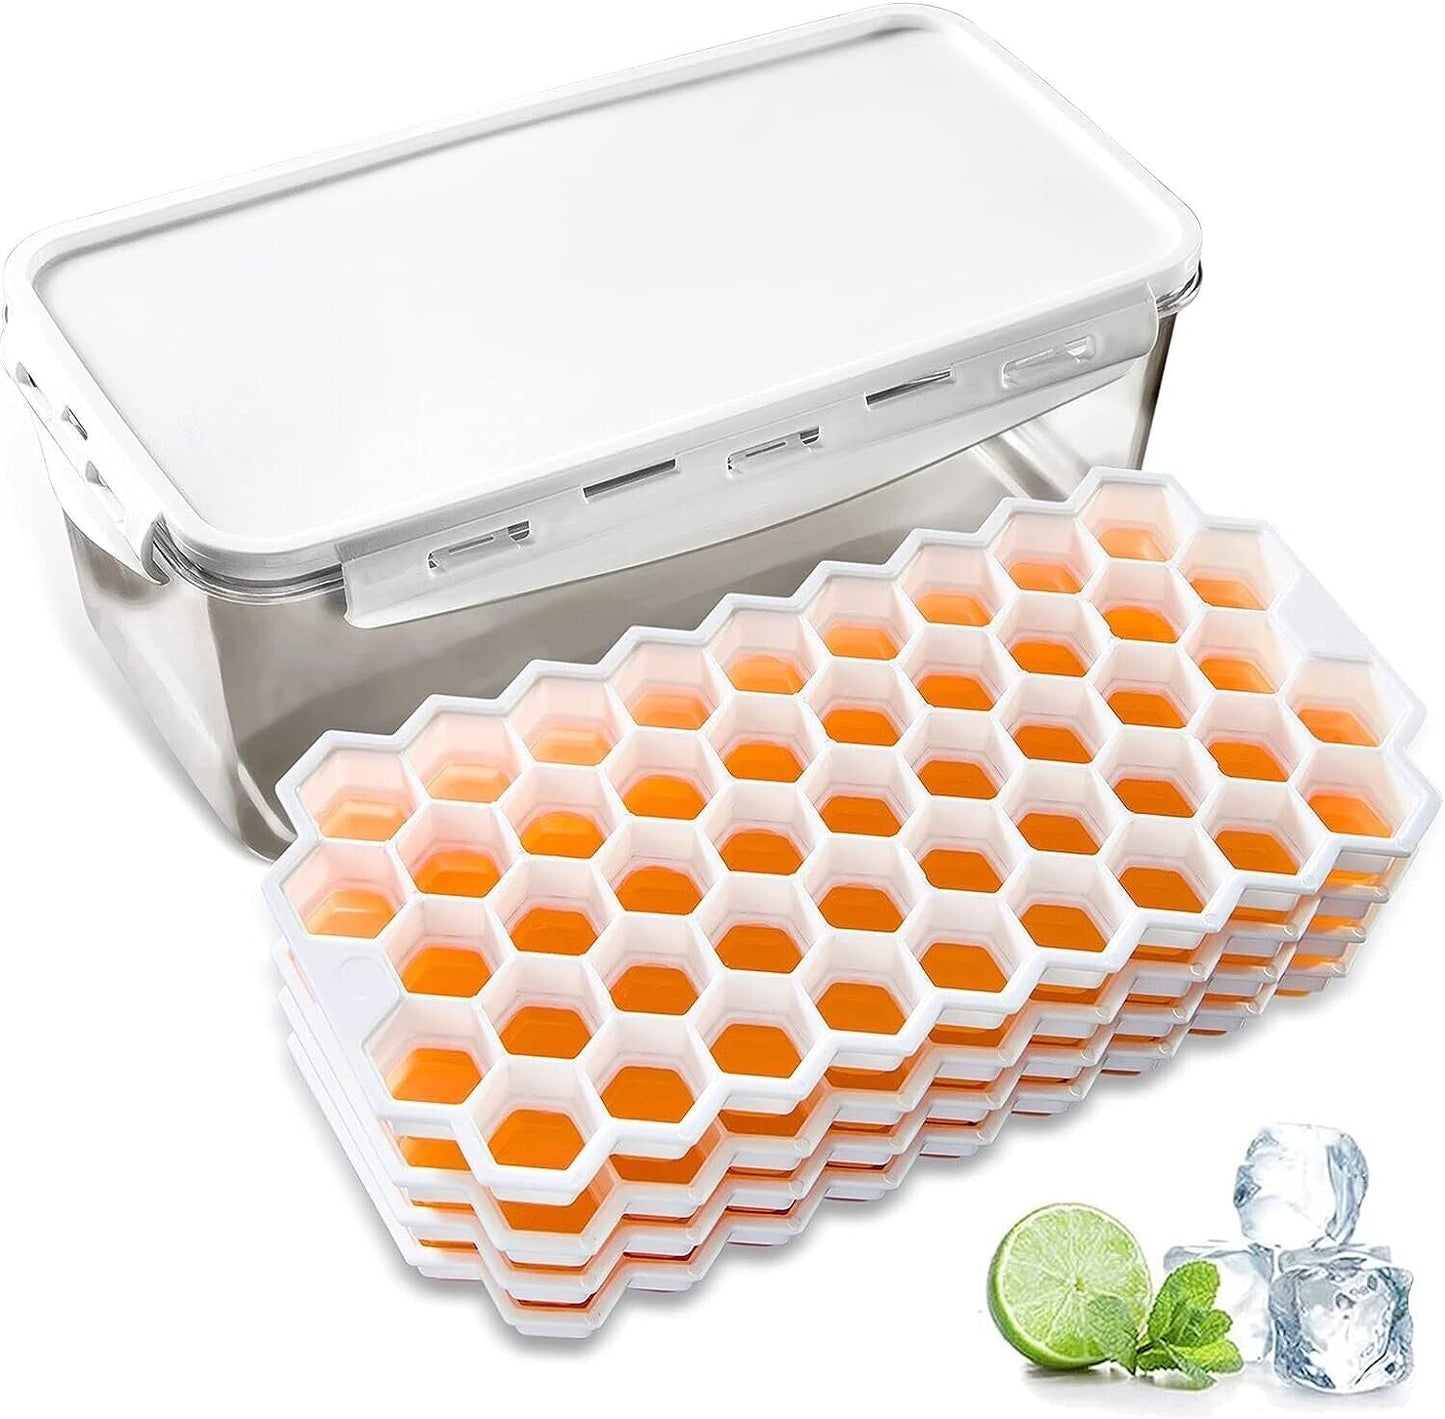 4 Pack Ice Cube Trays With Air Tight Container and Locking Lid Makes 188 Cubes - RLO Tech